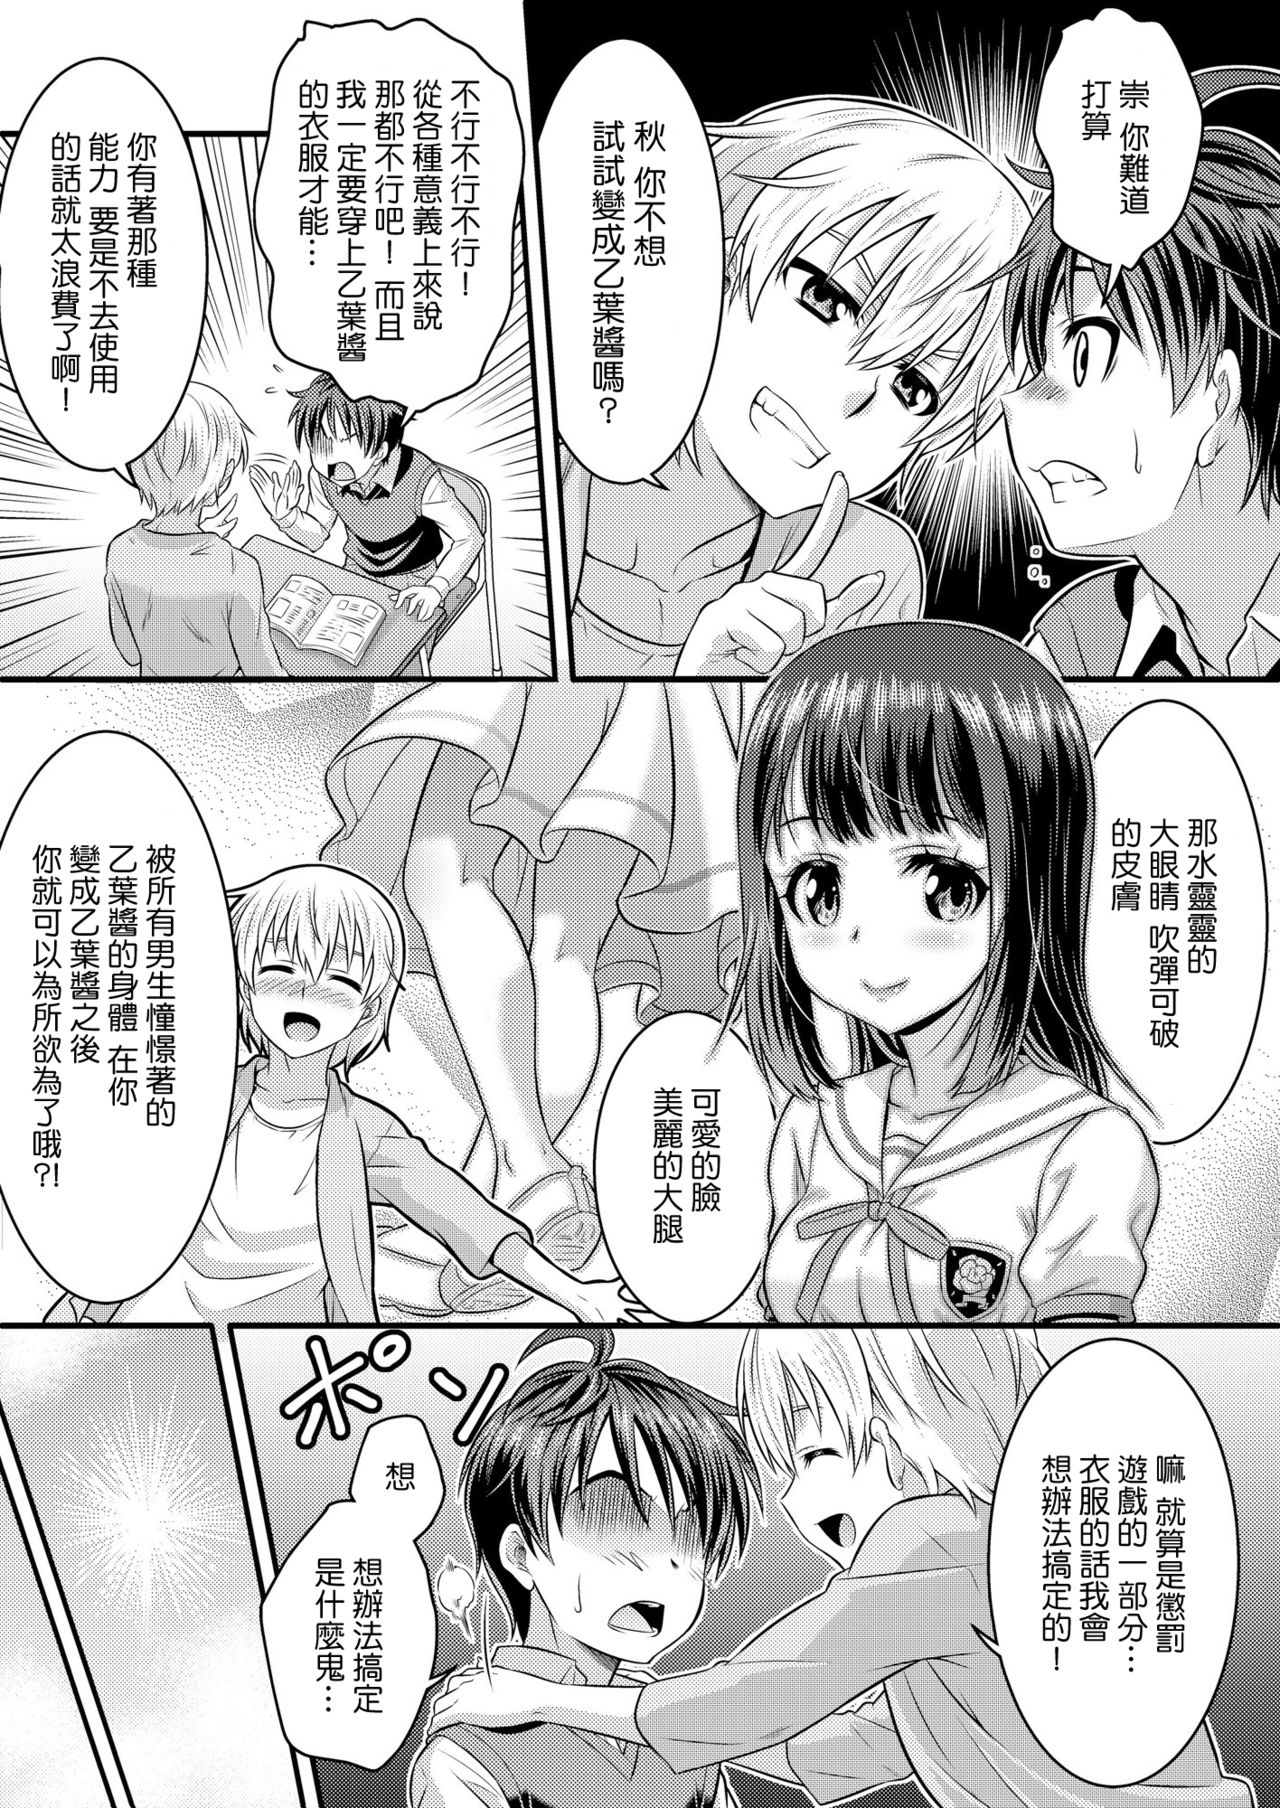 Metamorph ★ Coordination - I Become Whatever Girl I Crossdress As~ [Sister Arc, Classmate Arc] [Chinese] [瑞树汉化组] page 20 full